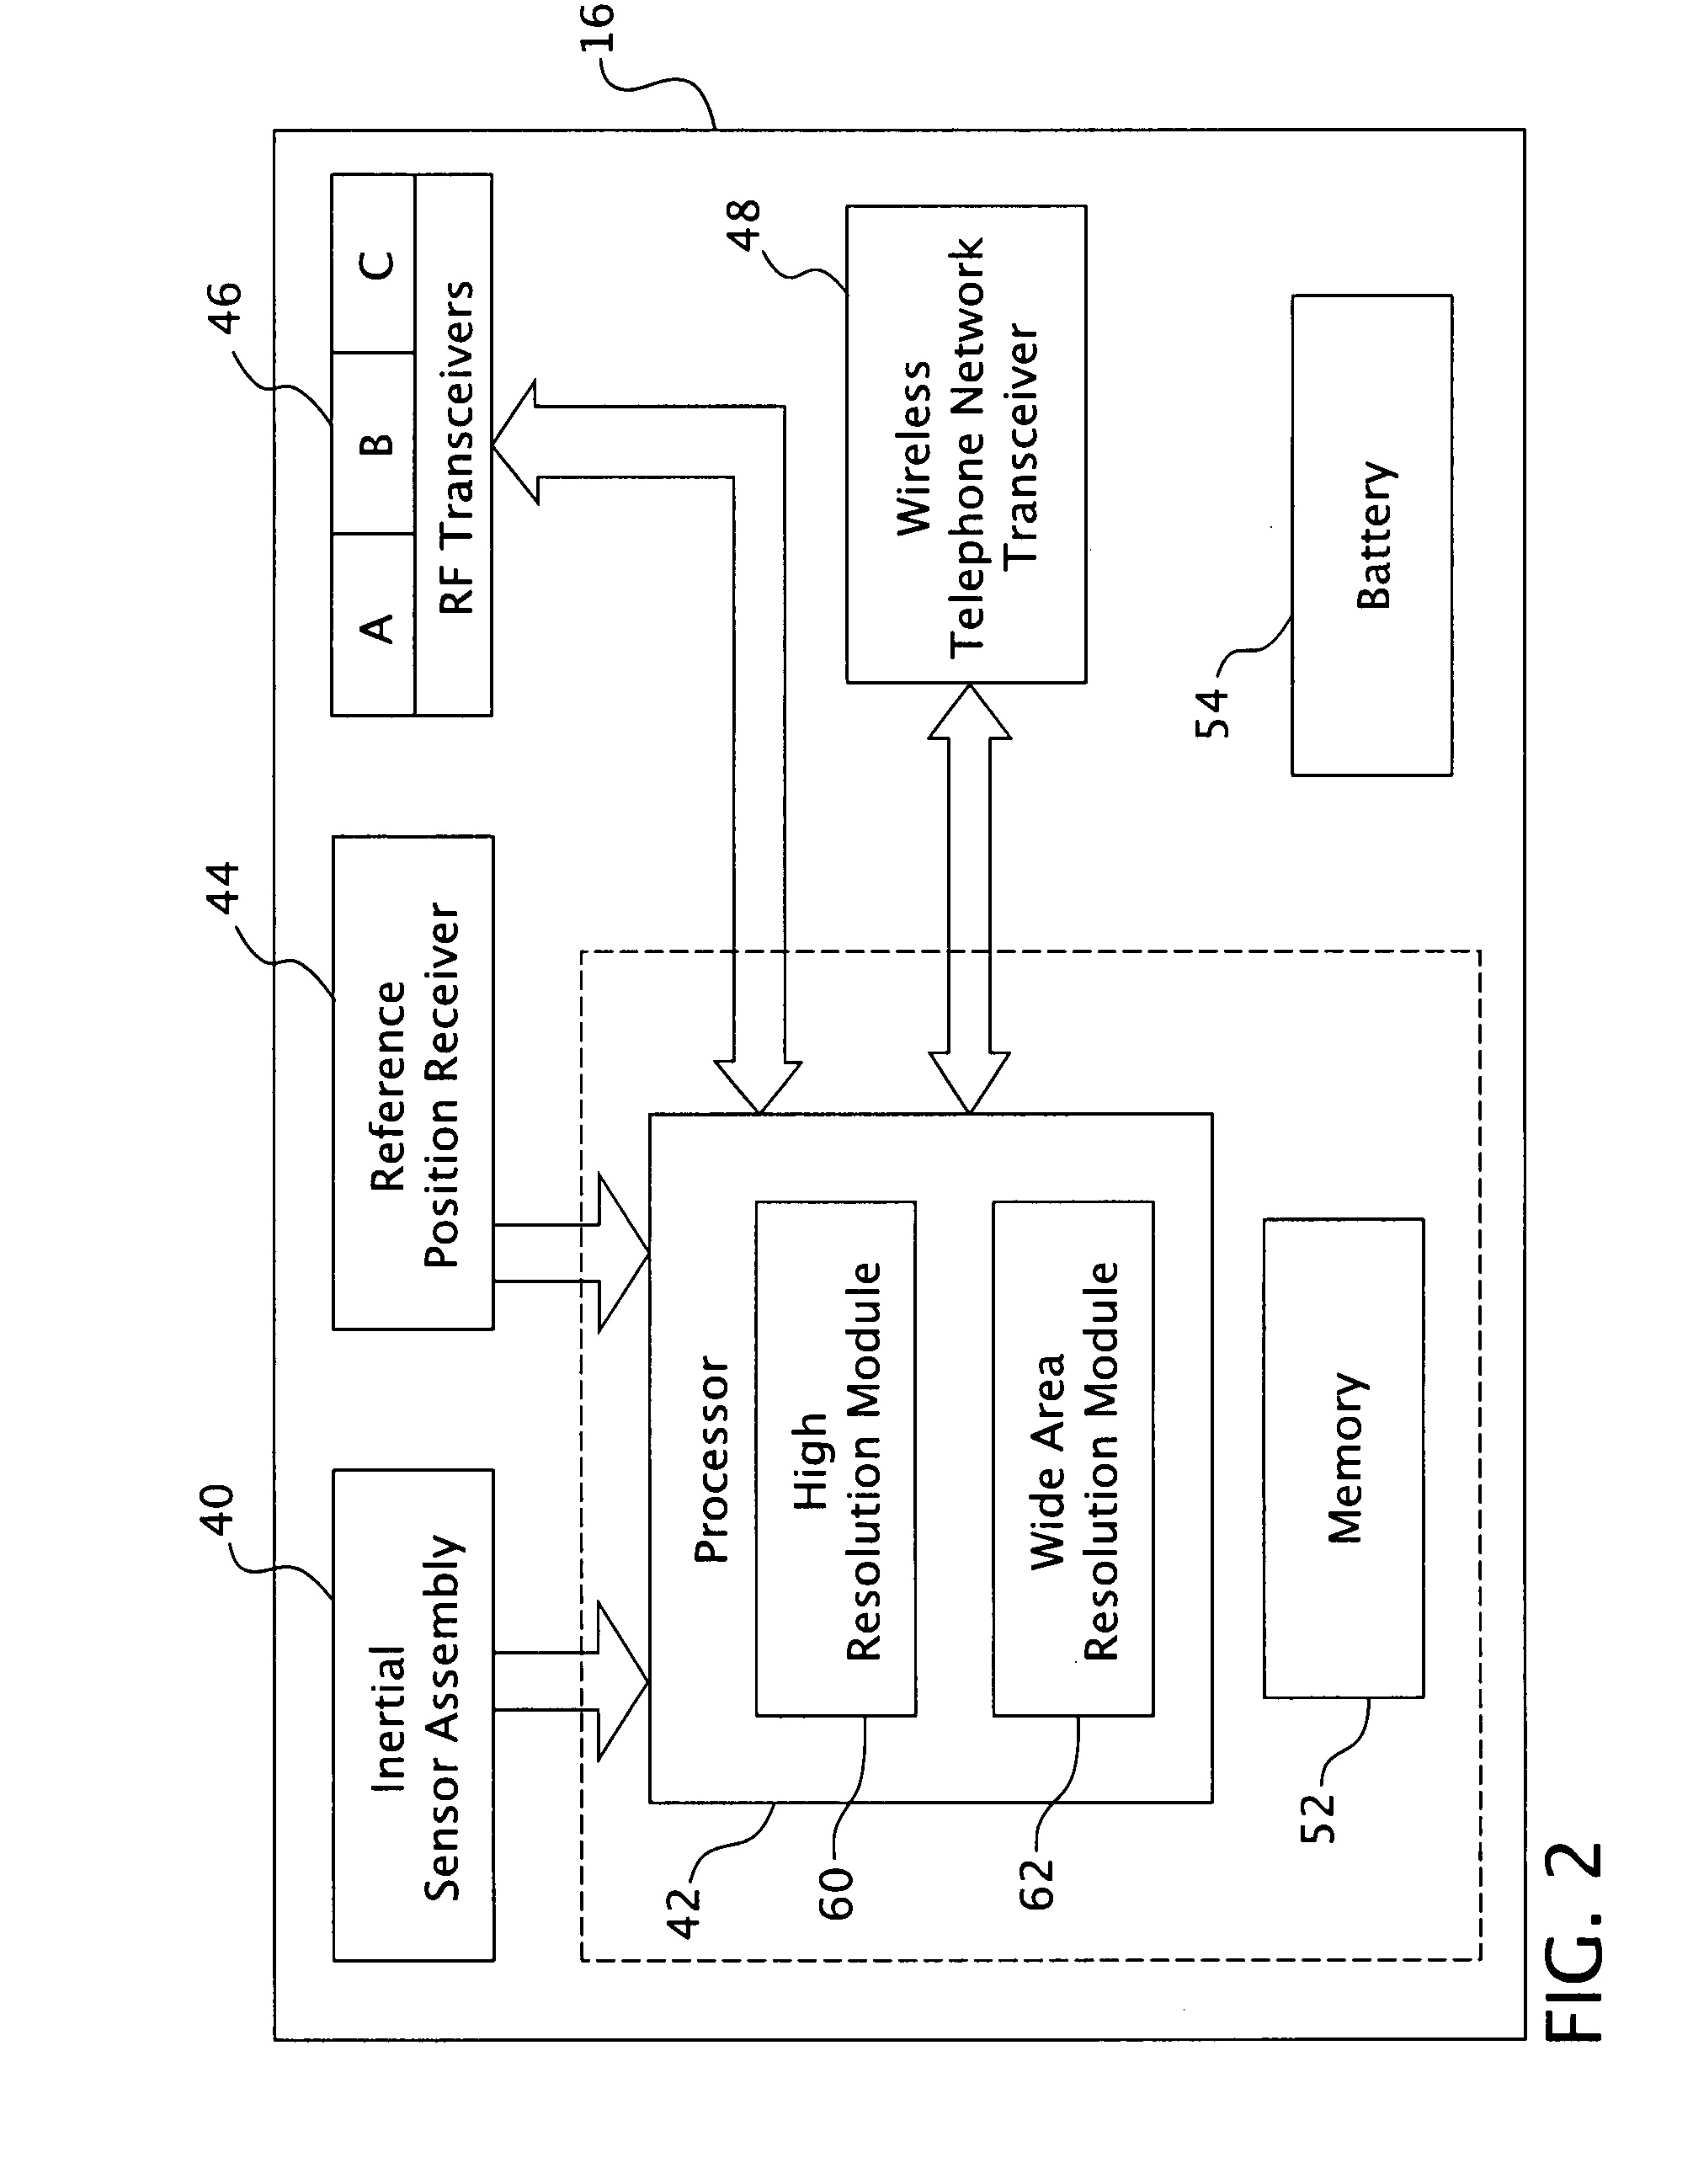 Systems and methods for determining a location of an object